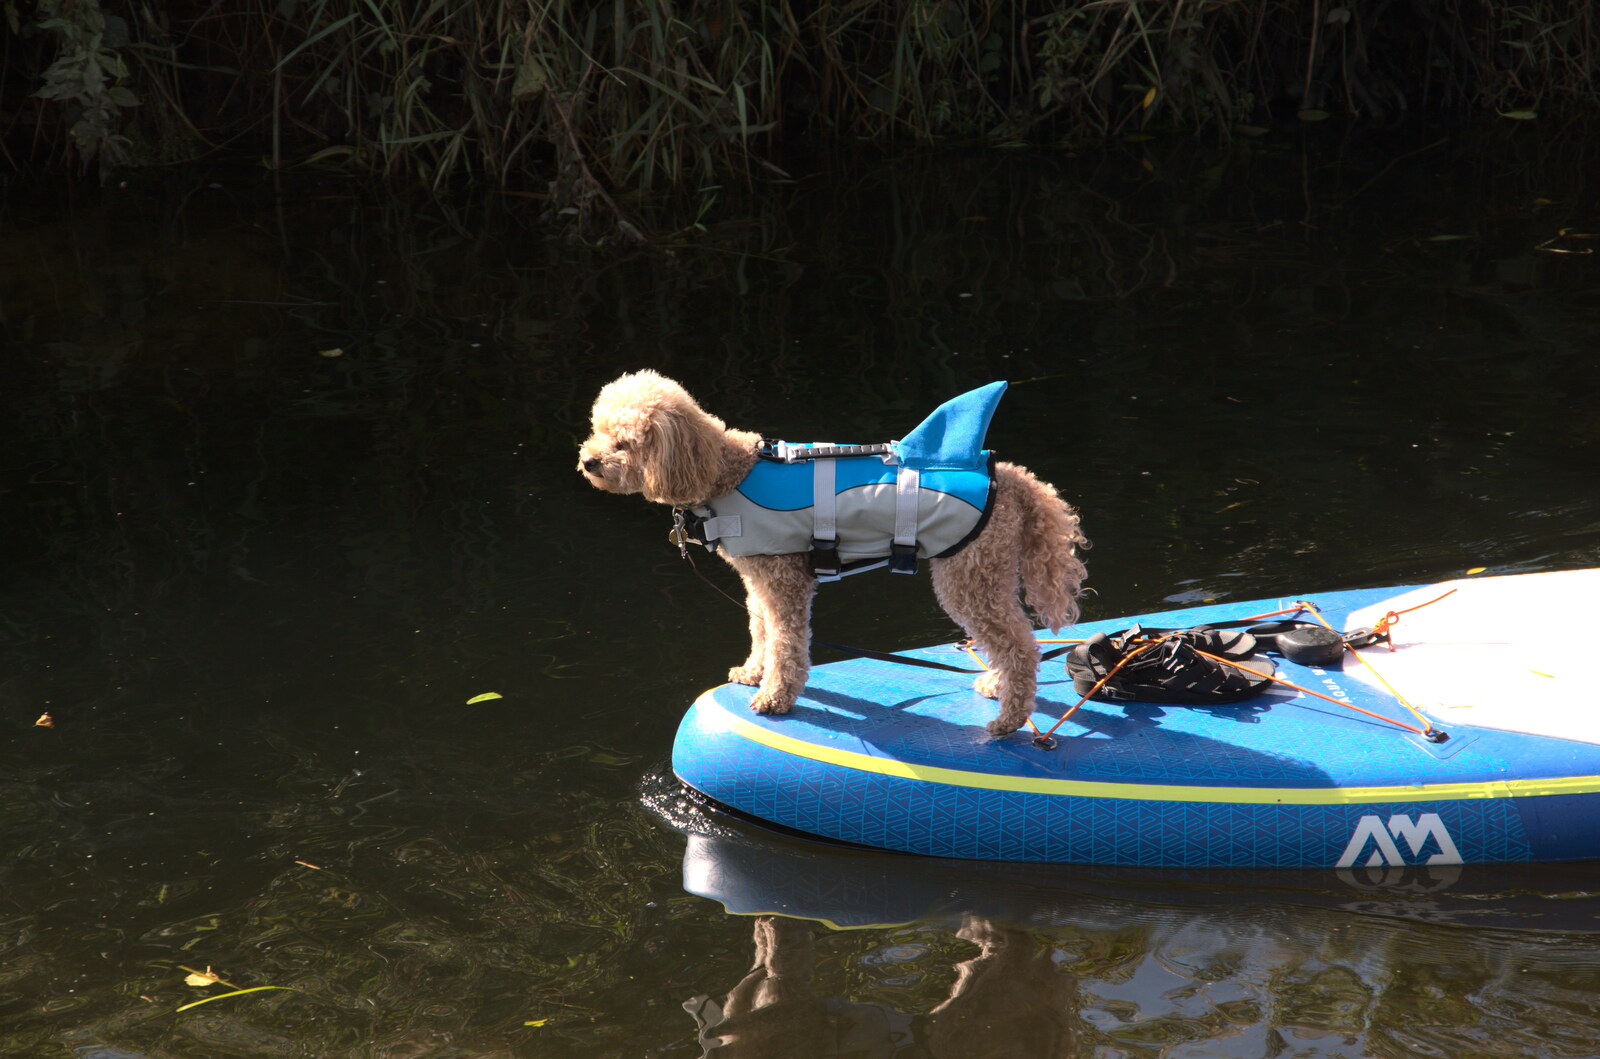 Camping at Three Rivers, Geldeston, Norfolk - 5th September 2020: A small dog, with shark fin, floats past